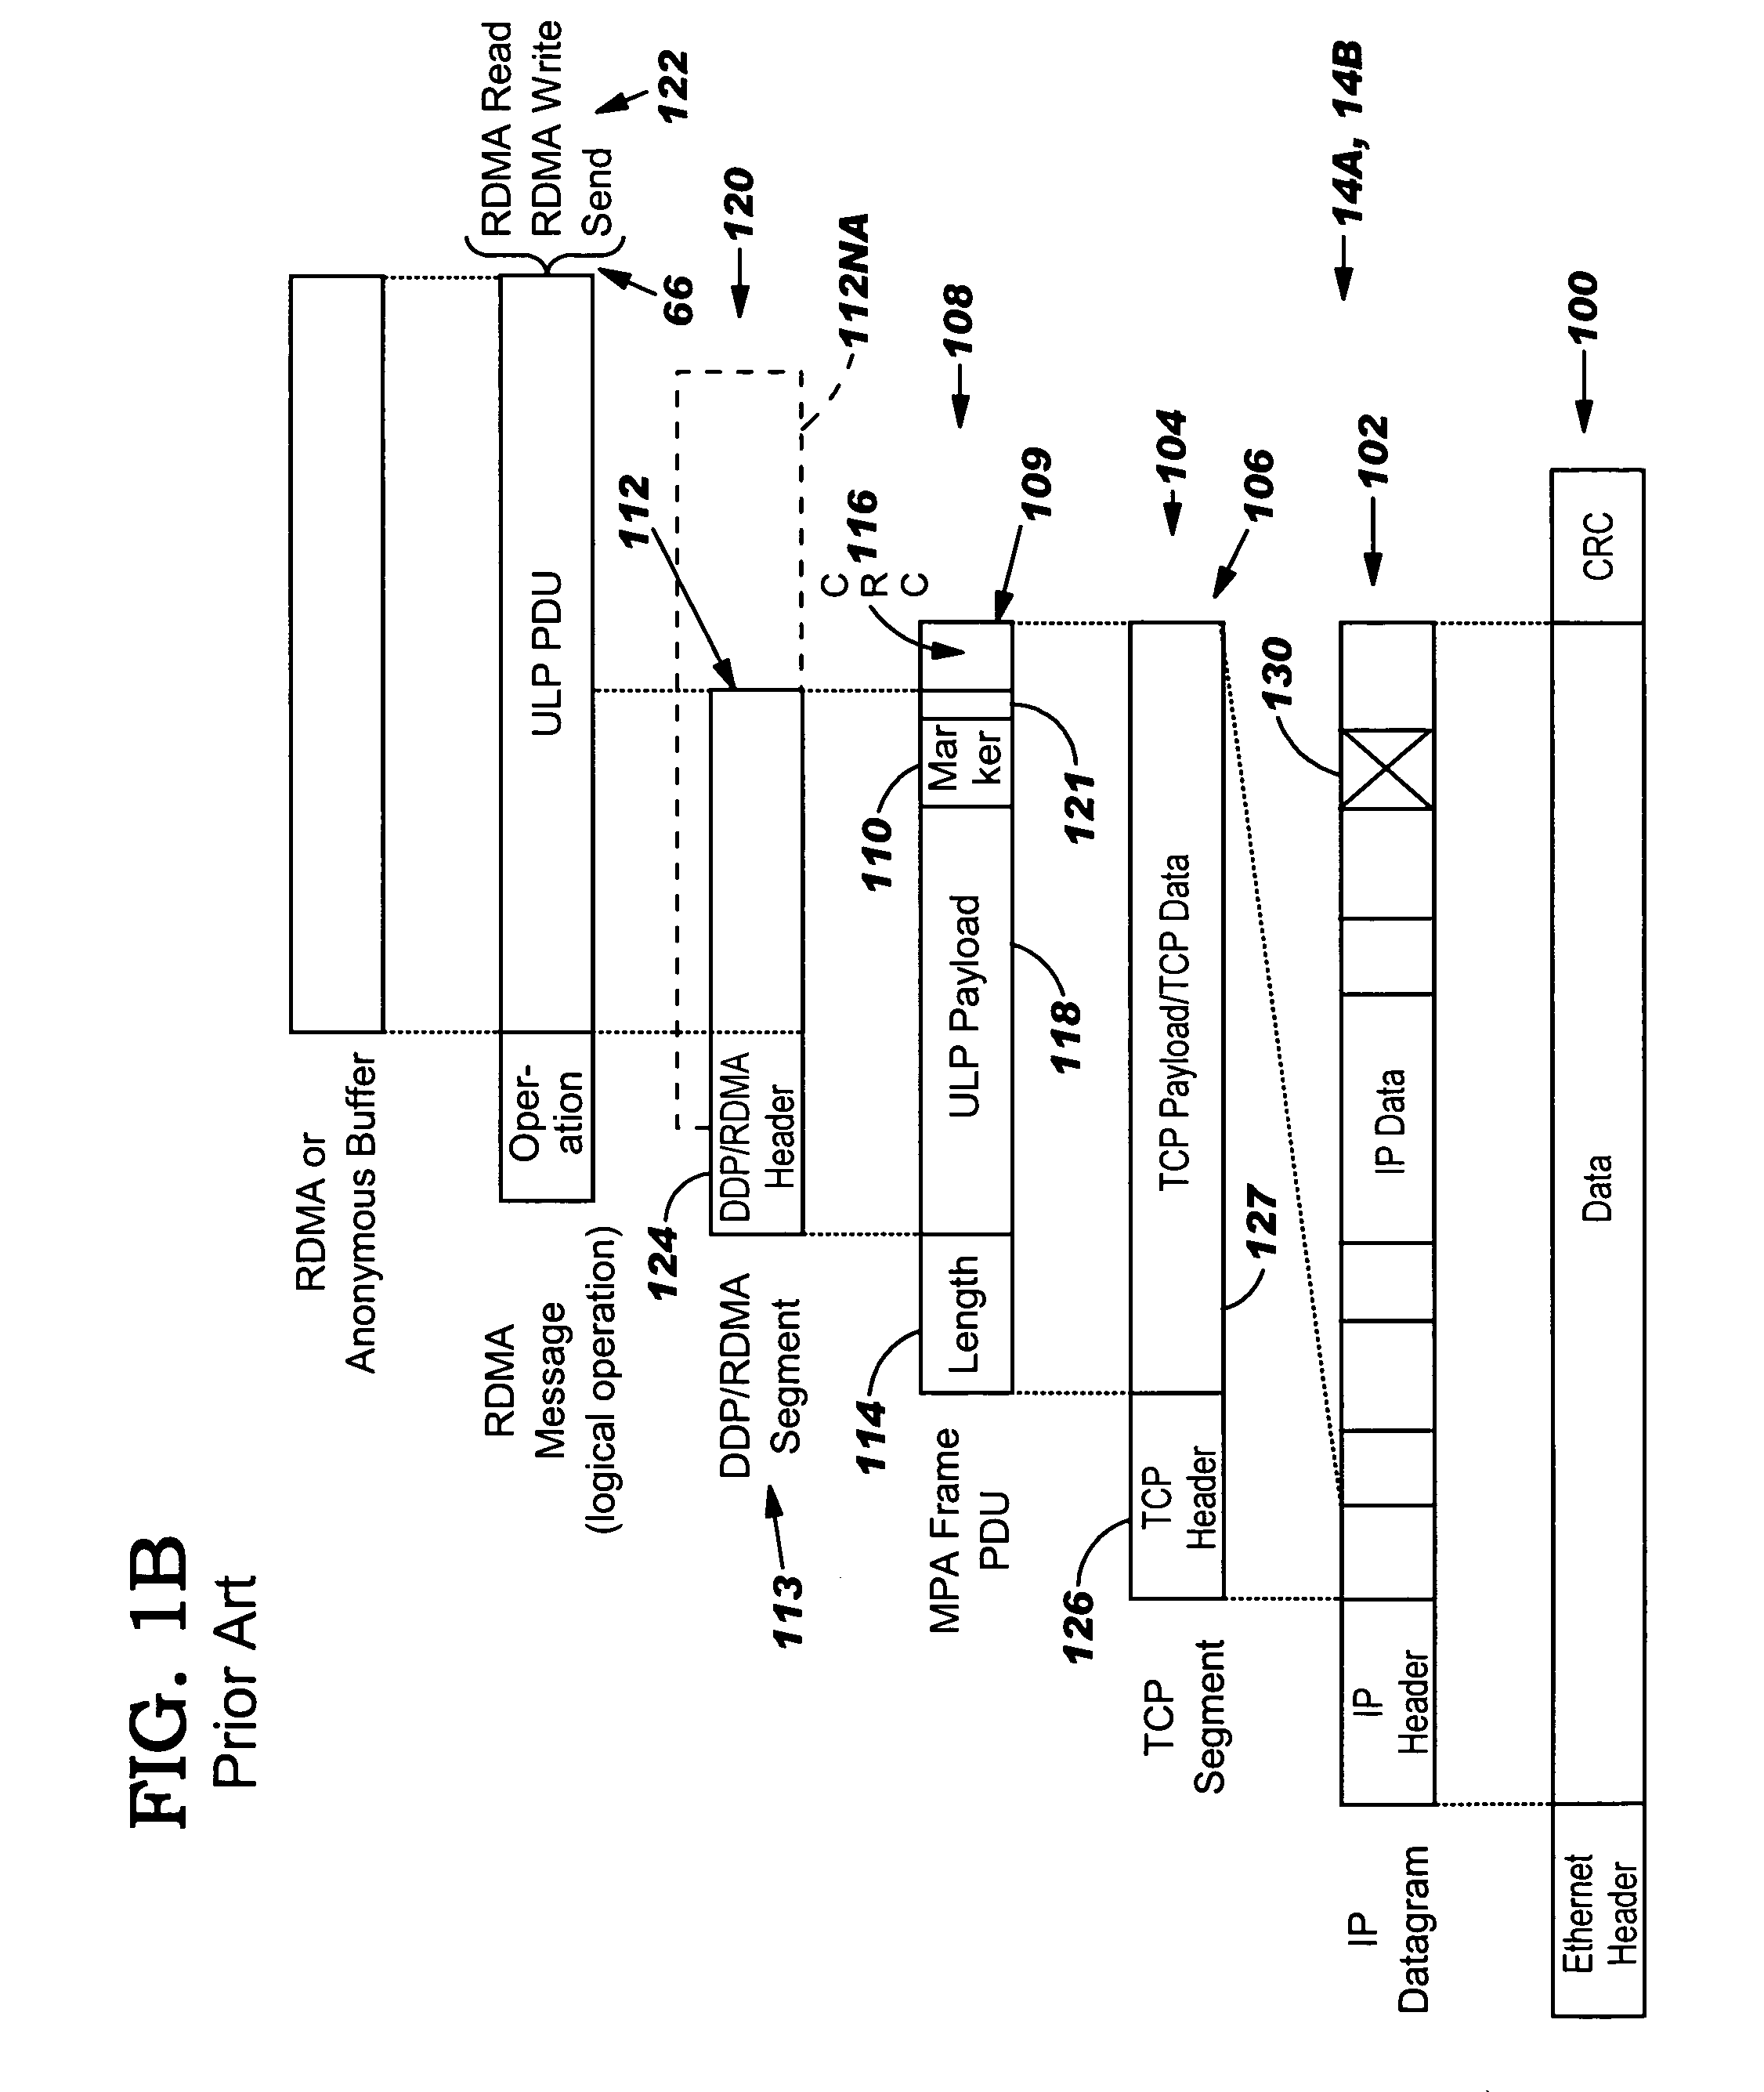 RDMA network interface controller with cut-through implementation for aligned DDP segments